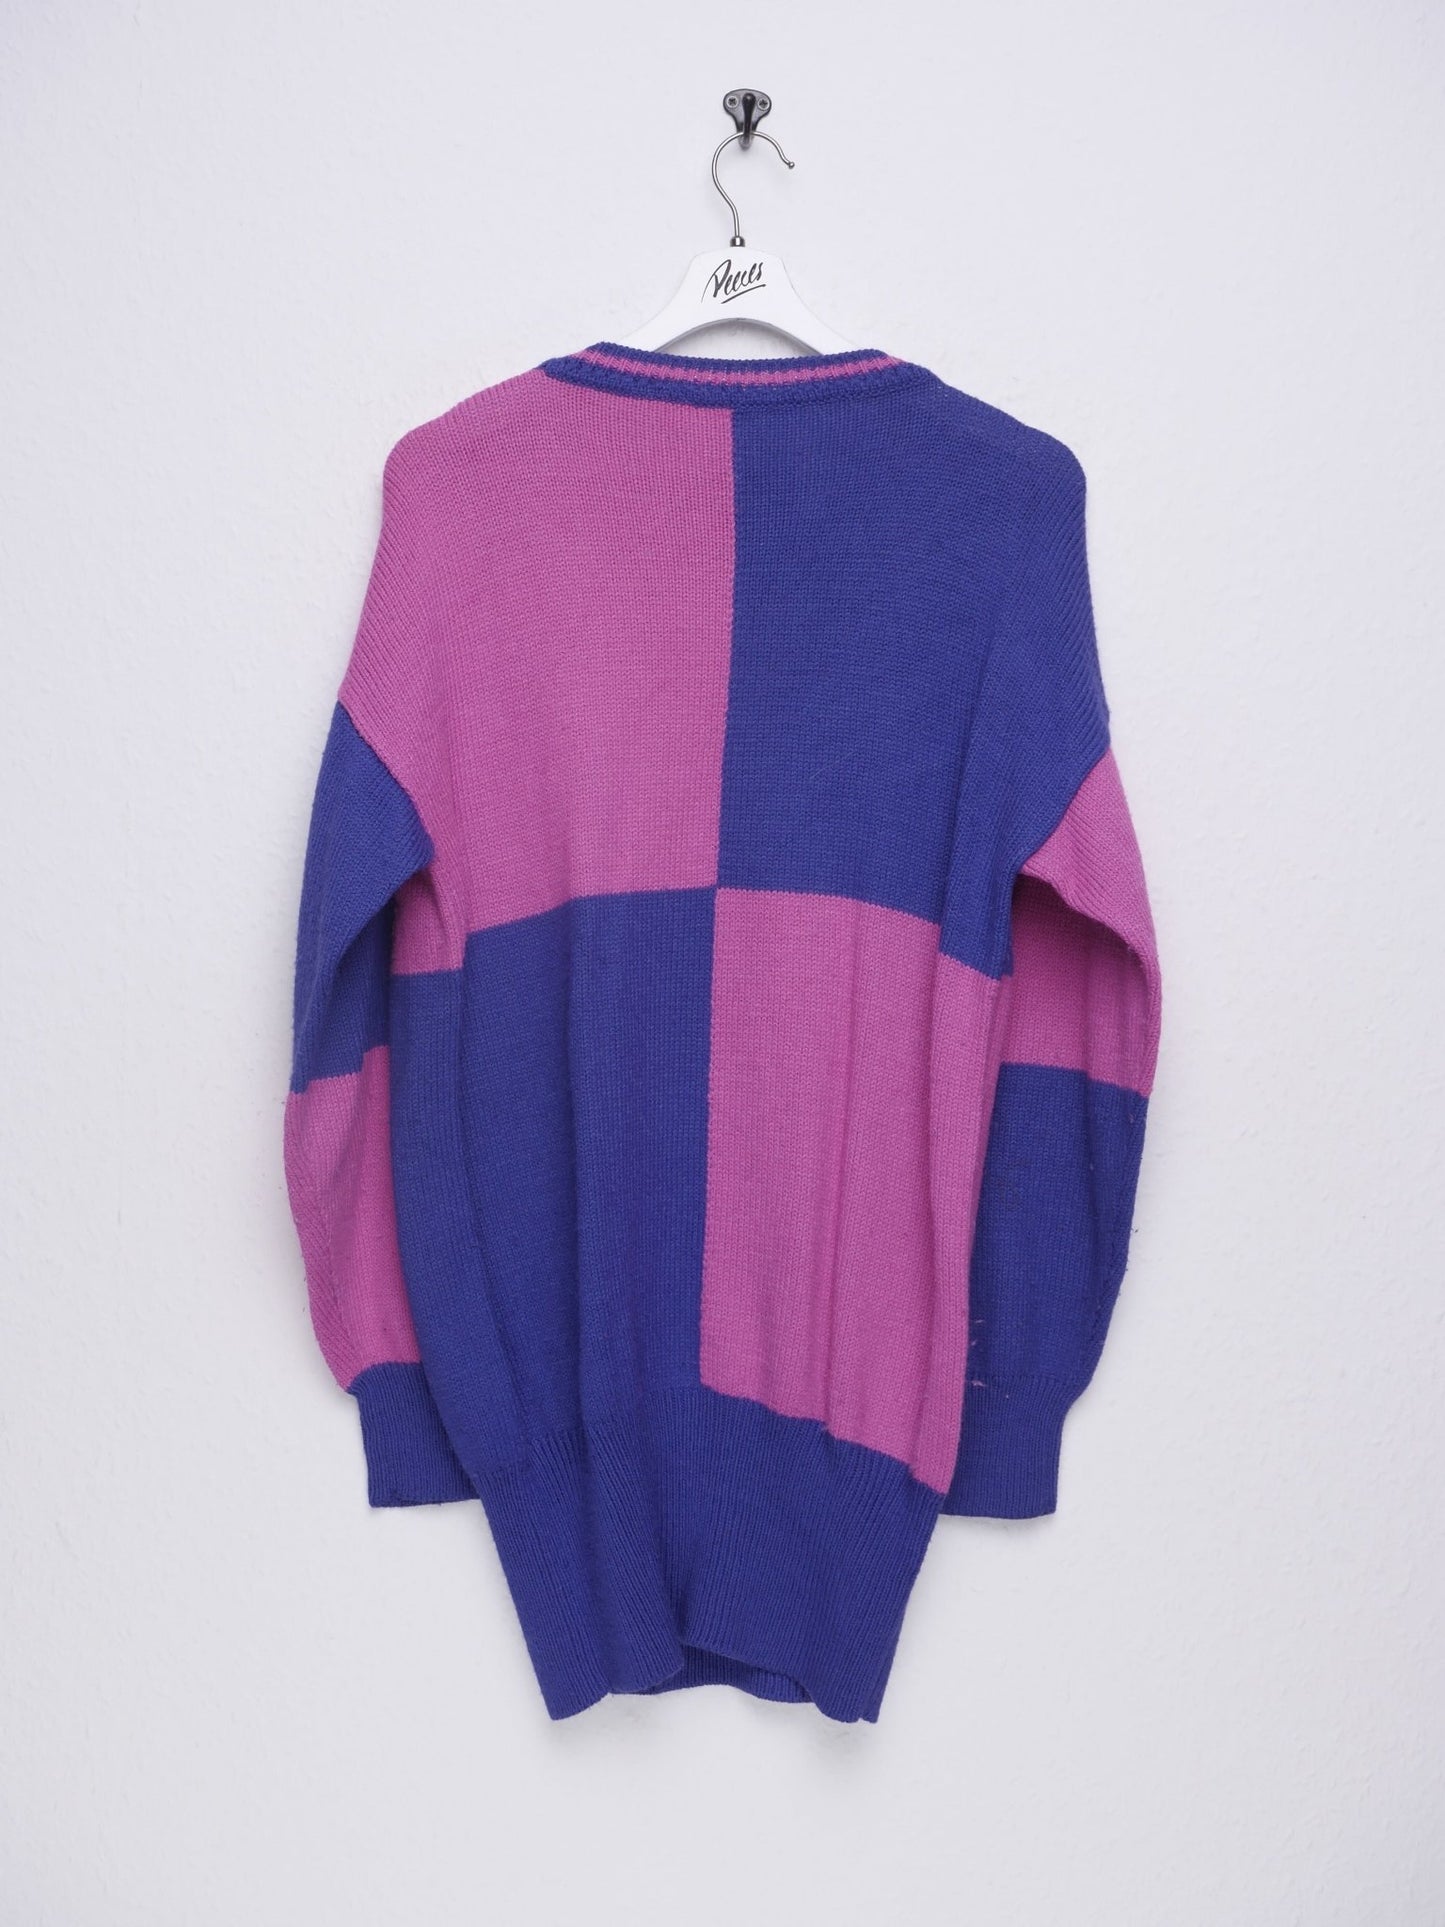 pink blue cheuquered knit Sweater - Peeces